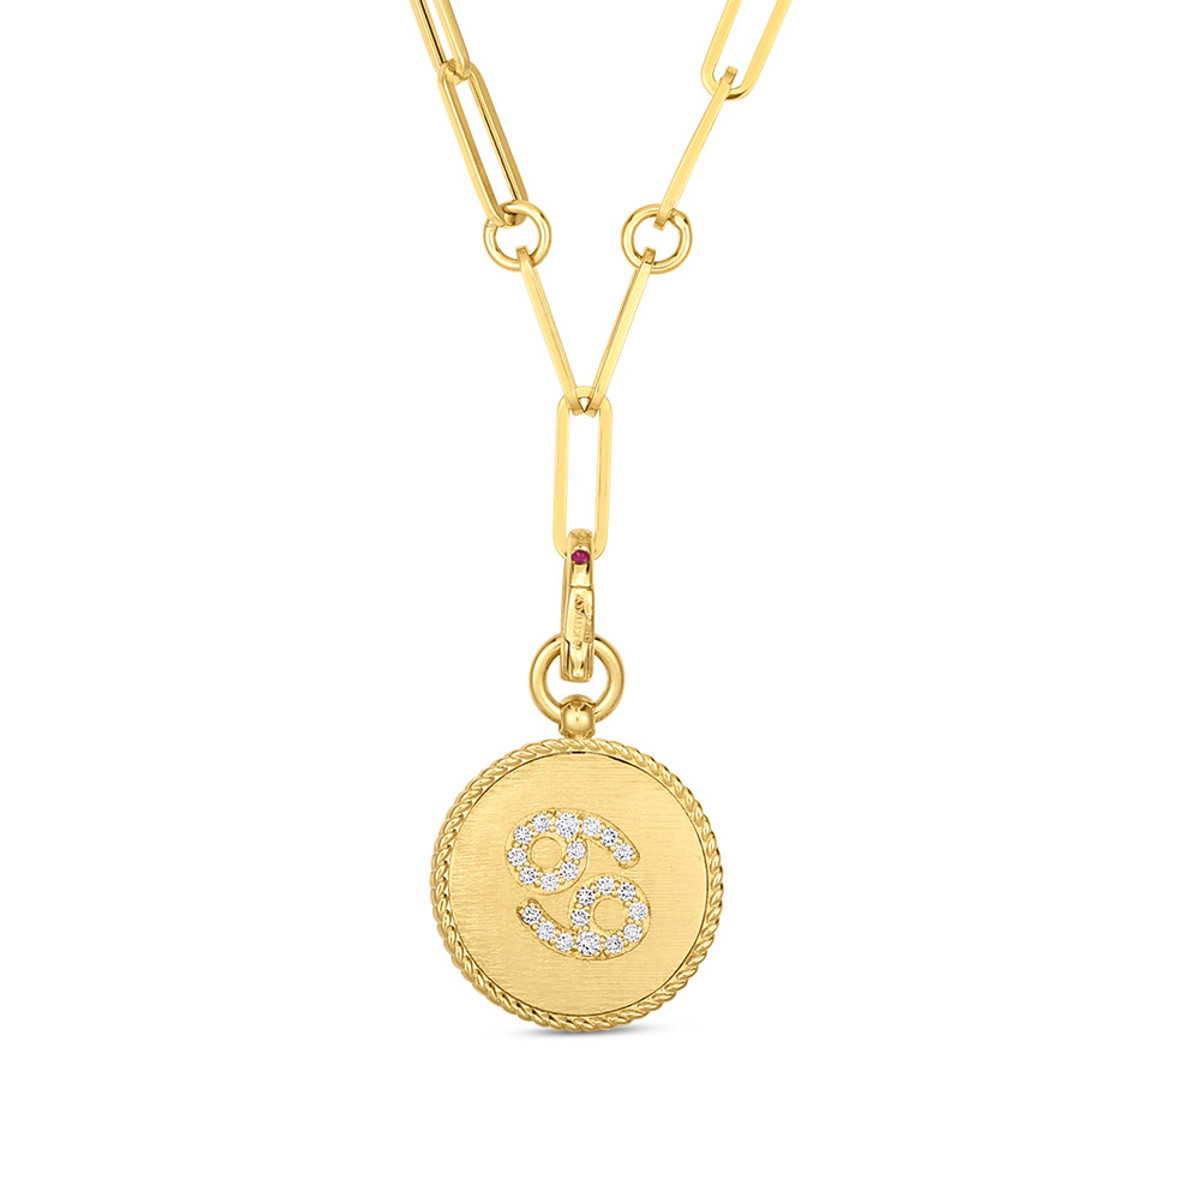 Roberto Coin 18K Yellow Gold Zodiac Diamond Necklace Cancer-30287 Product Image